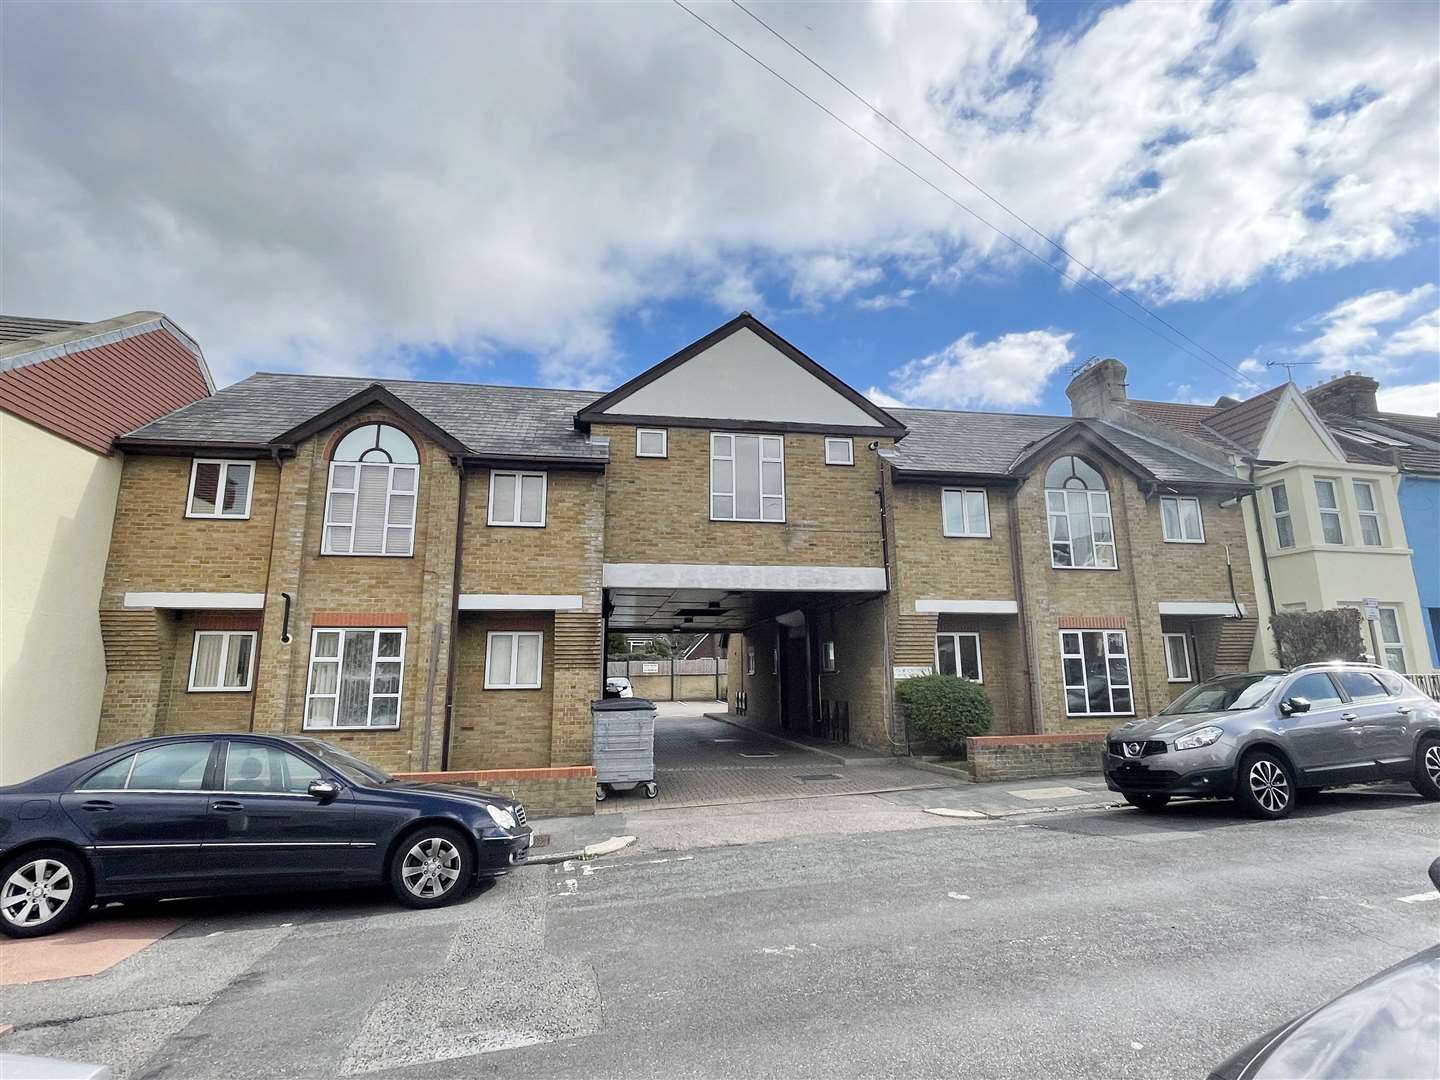 Pritchard Court, a block of 10 flats in Shakespeare Road, Gillingham, sold for £1,150,000 at the latest Clive Emson auction